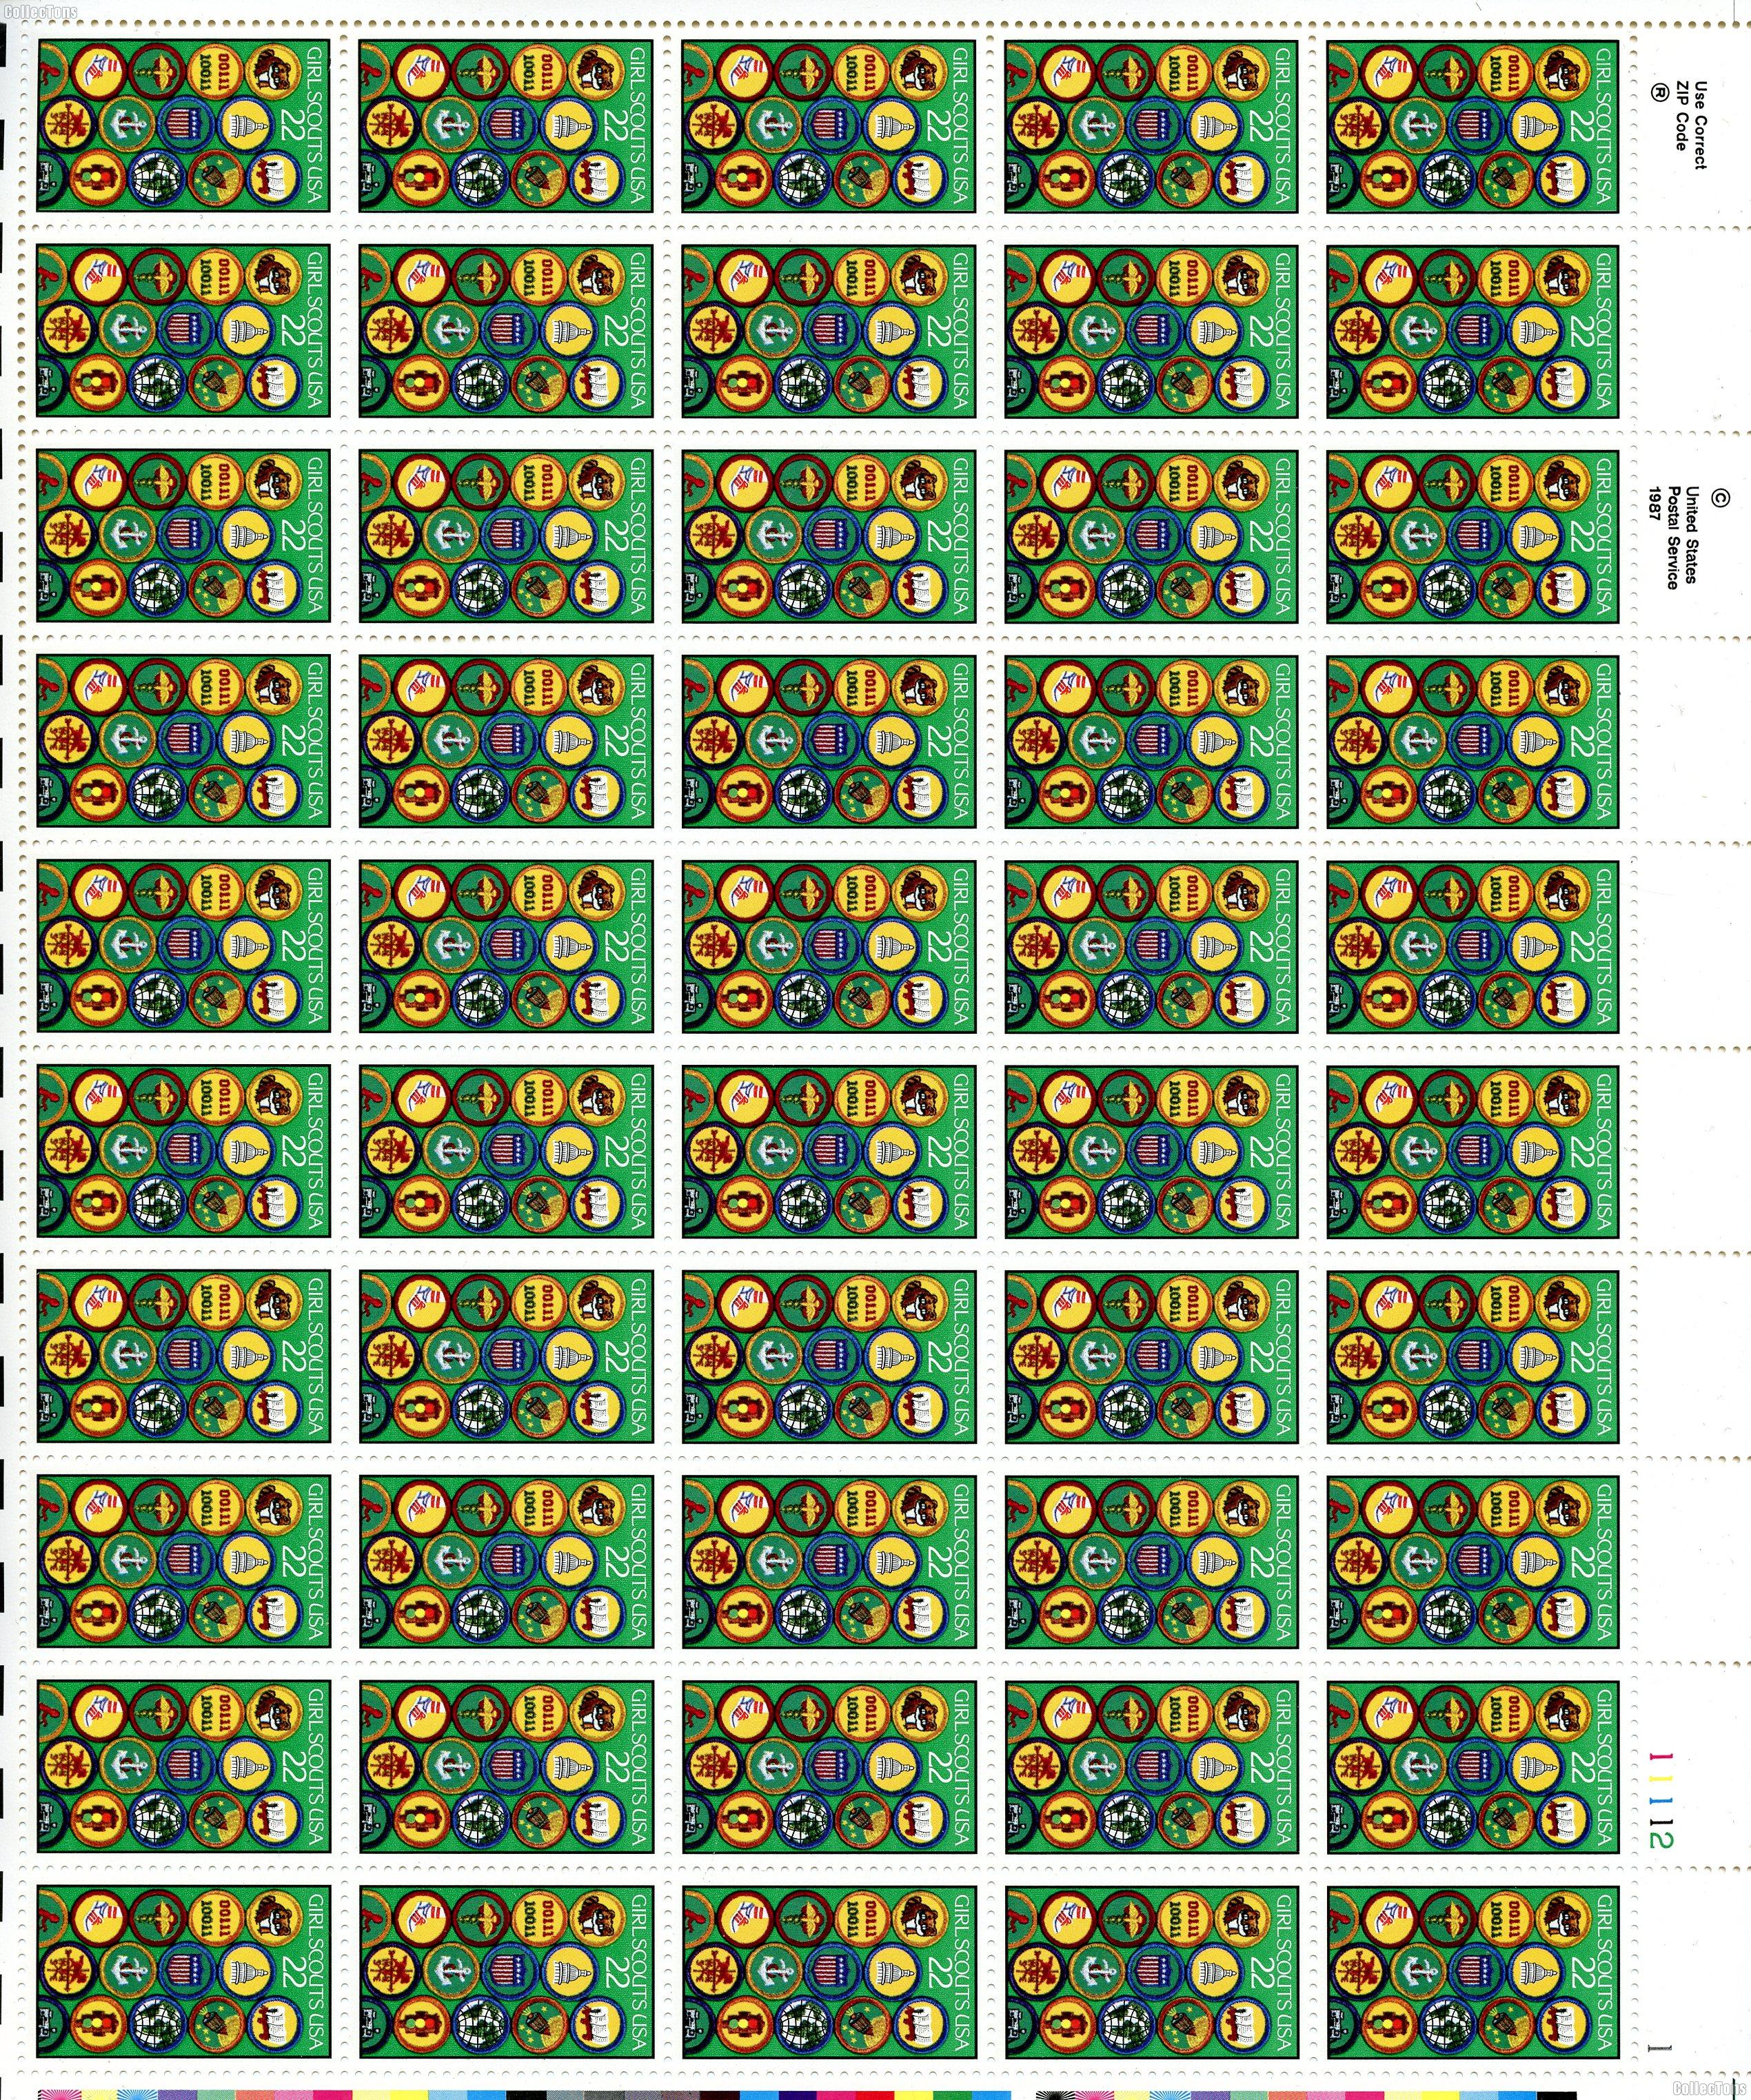 1987 Girl Scouts 22 Cent US Postage Stamp MNH Sheet of 50 Scott #2251